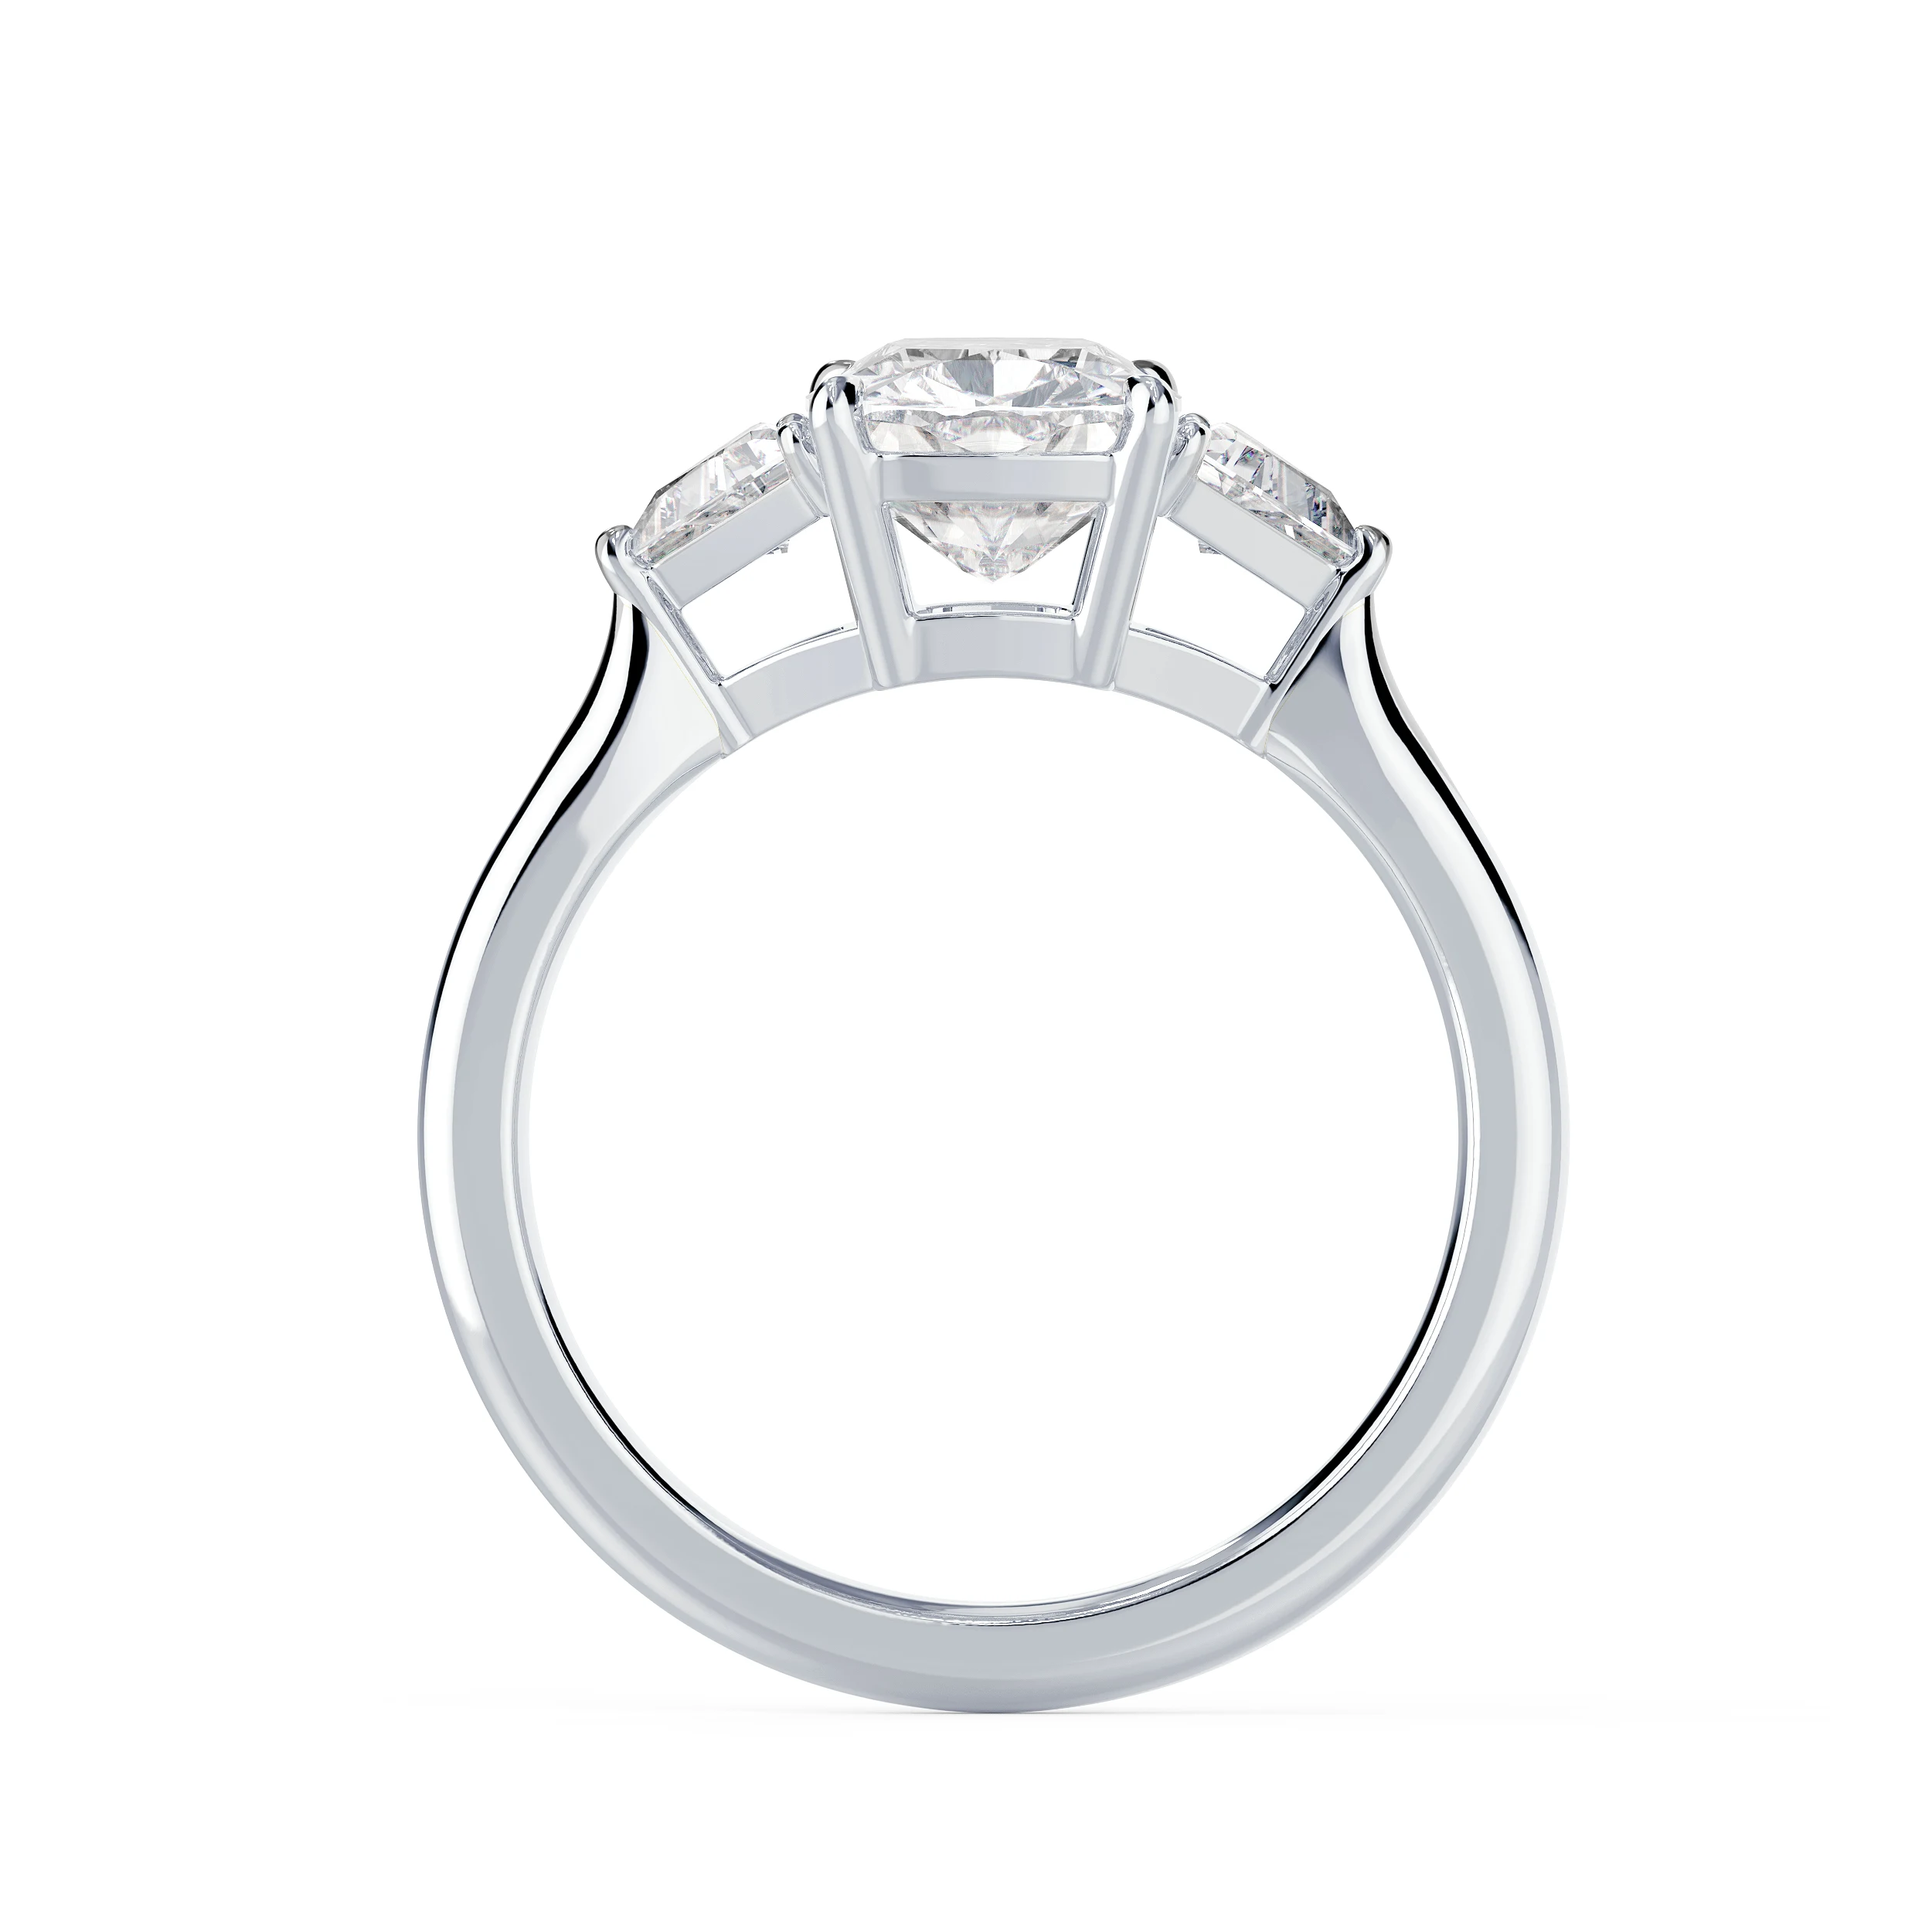 White Gold Cushion and Trillion Diamond Engagement Ring featuring Lab Diamonds (Profile View)